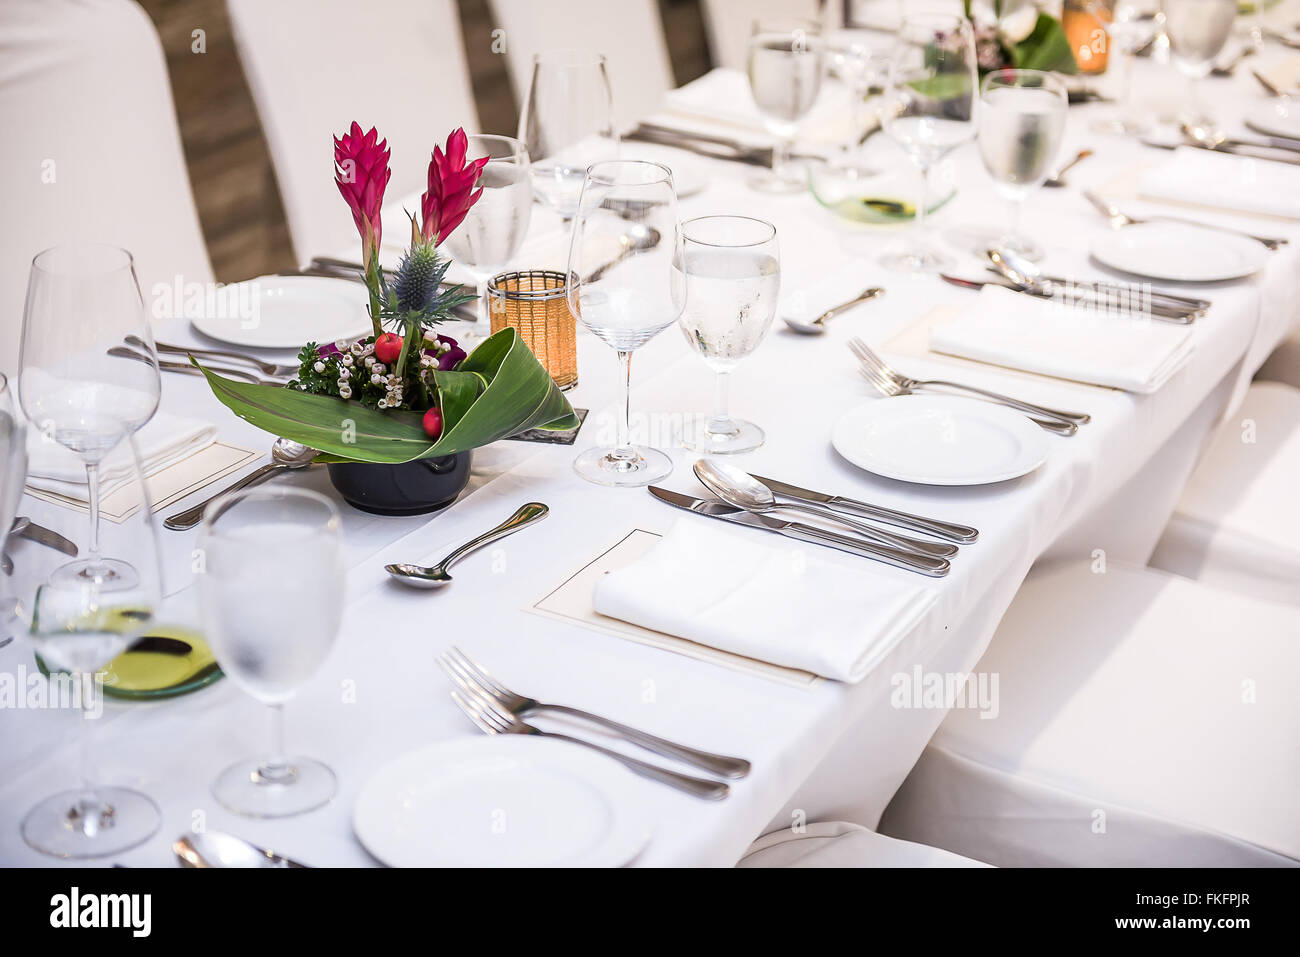 Plates and cutlery prepared for dinner reception. Stock Photo